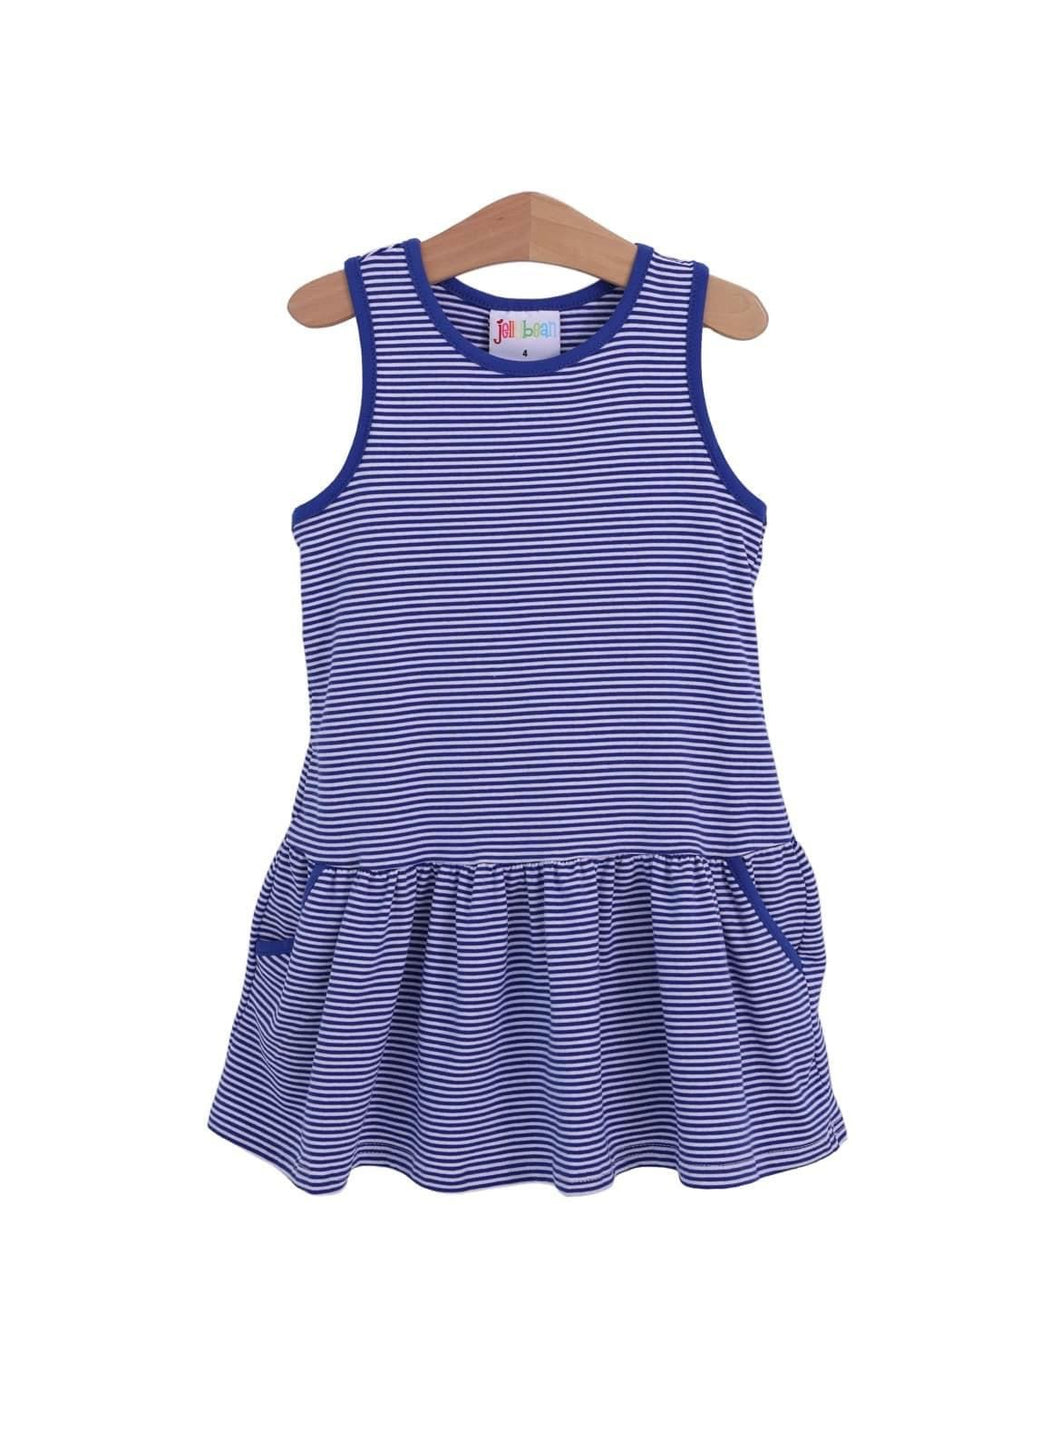 Jellybean Blue and White Bow Back Cheer Dress